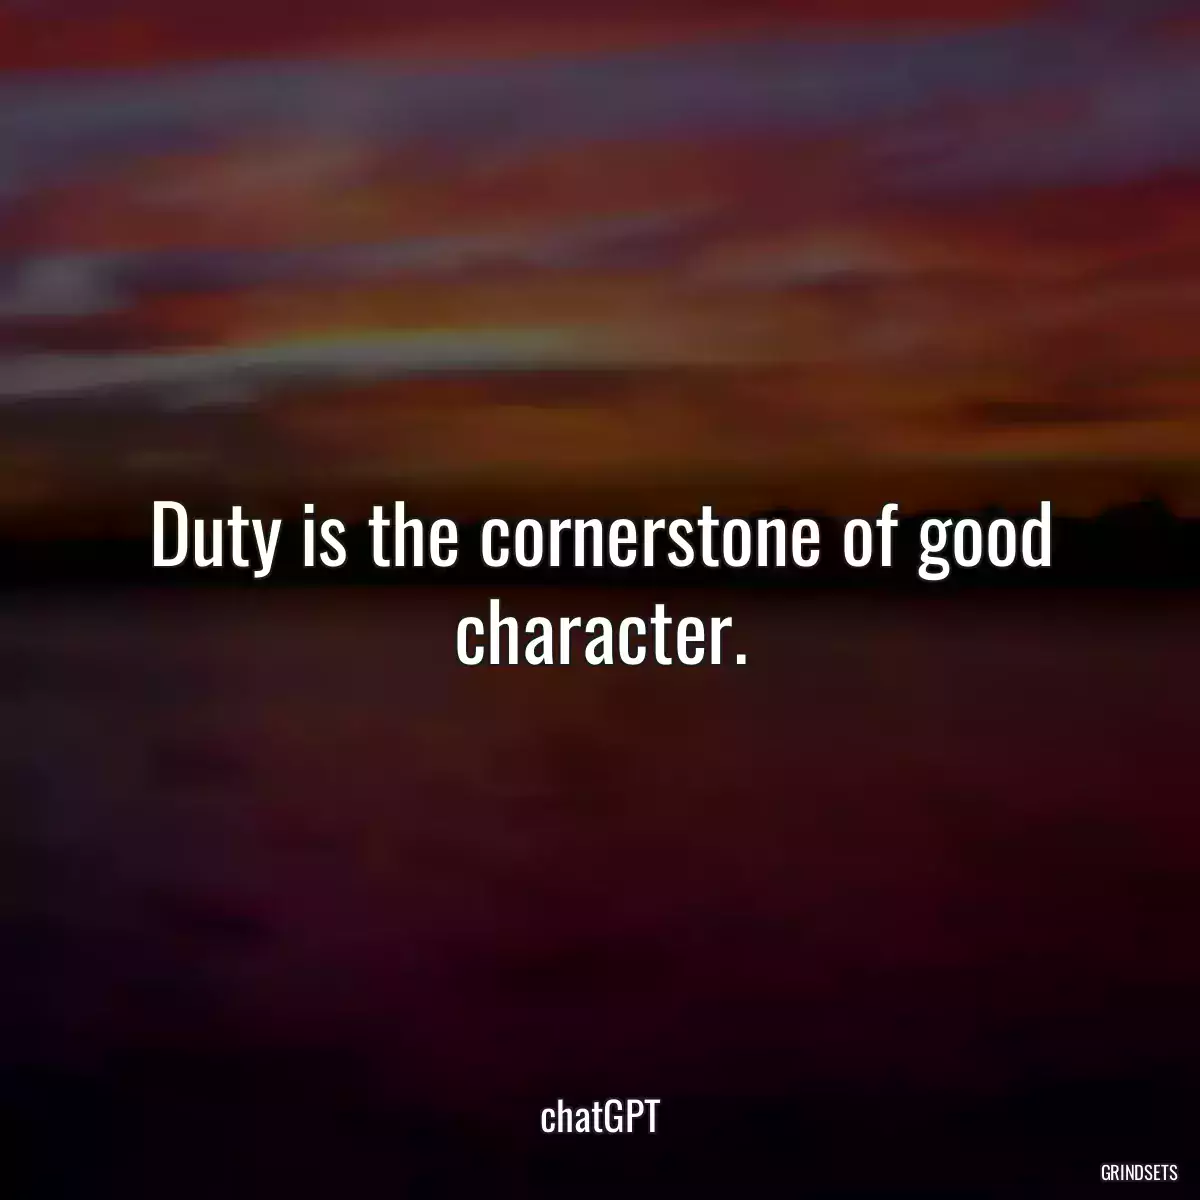 Duty is the cornerstone of good character.